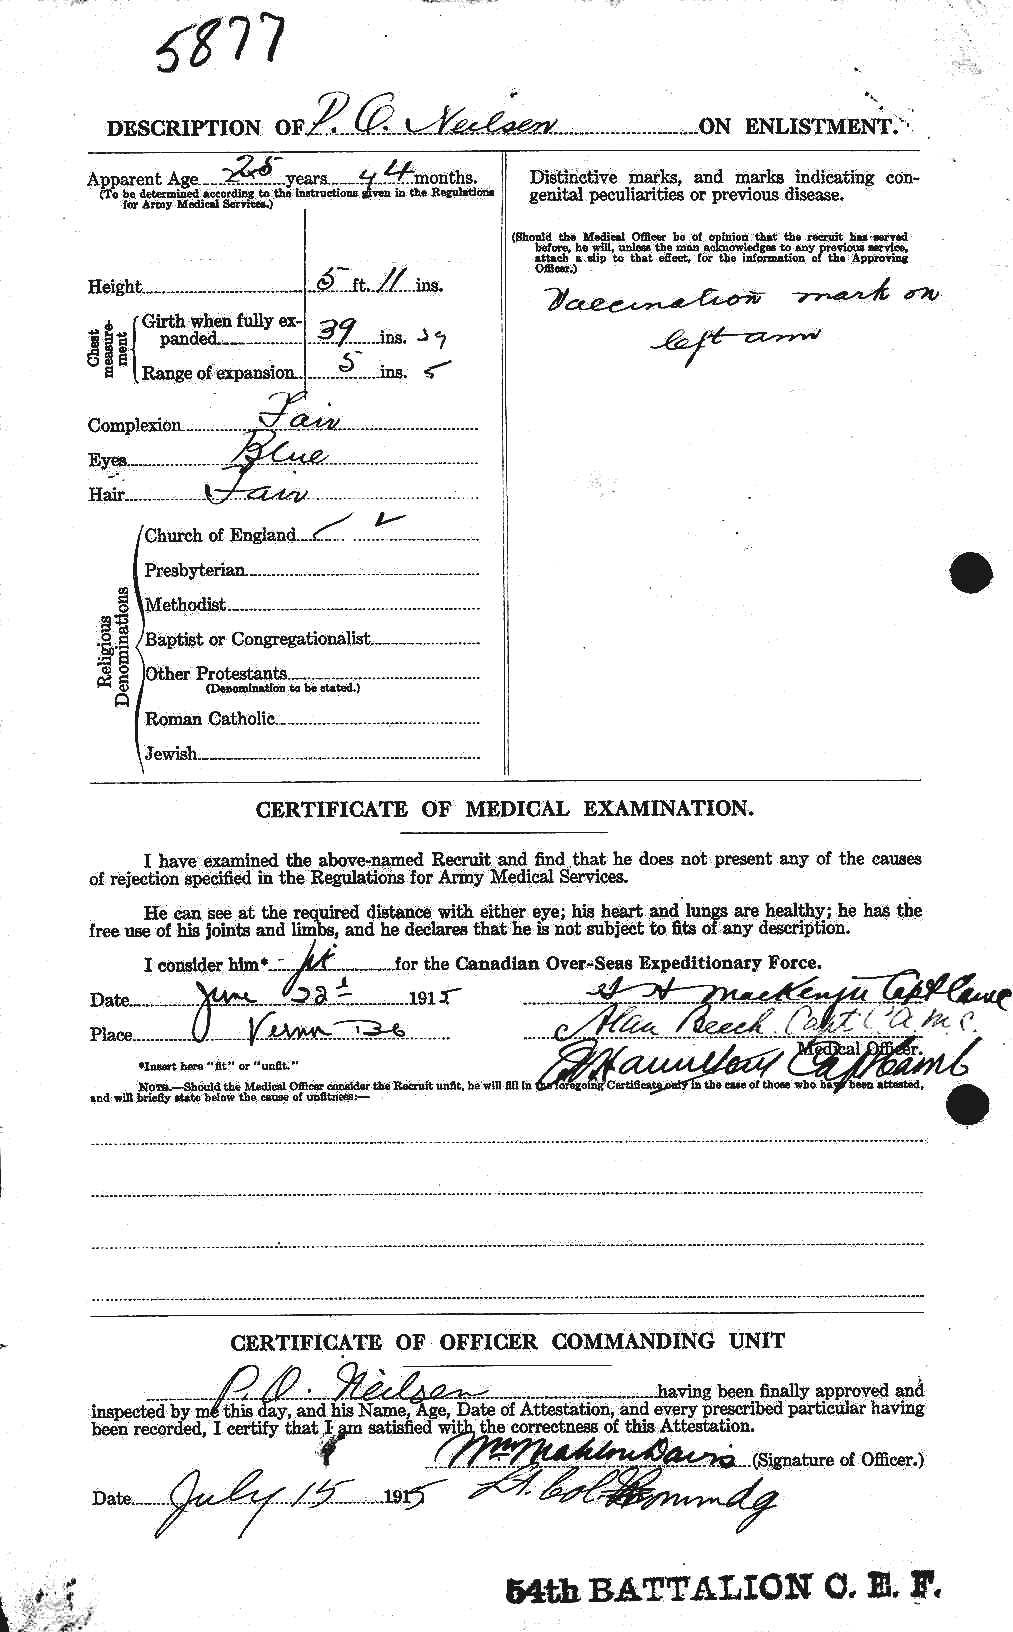 Personnel Records of the First World War - CEF 546673b